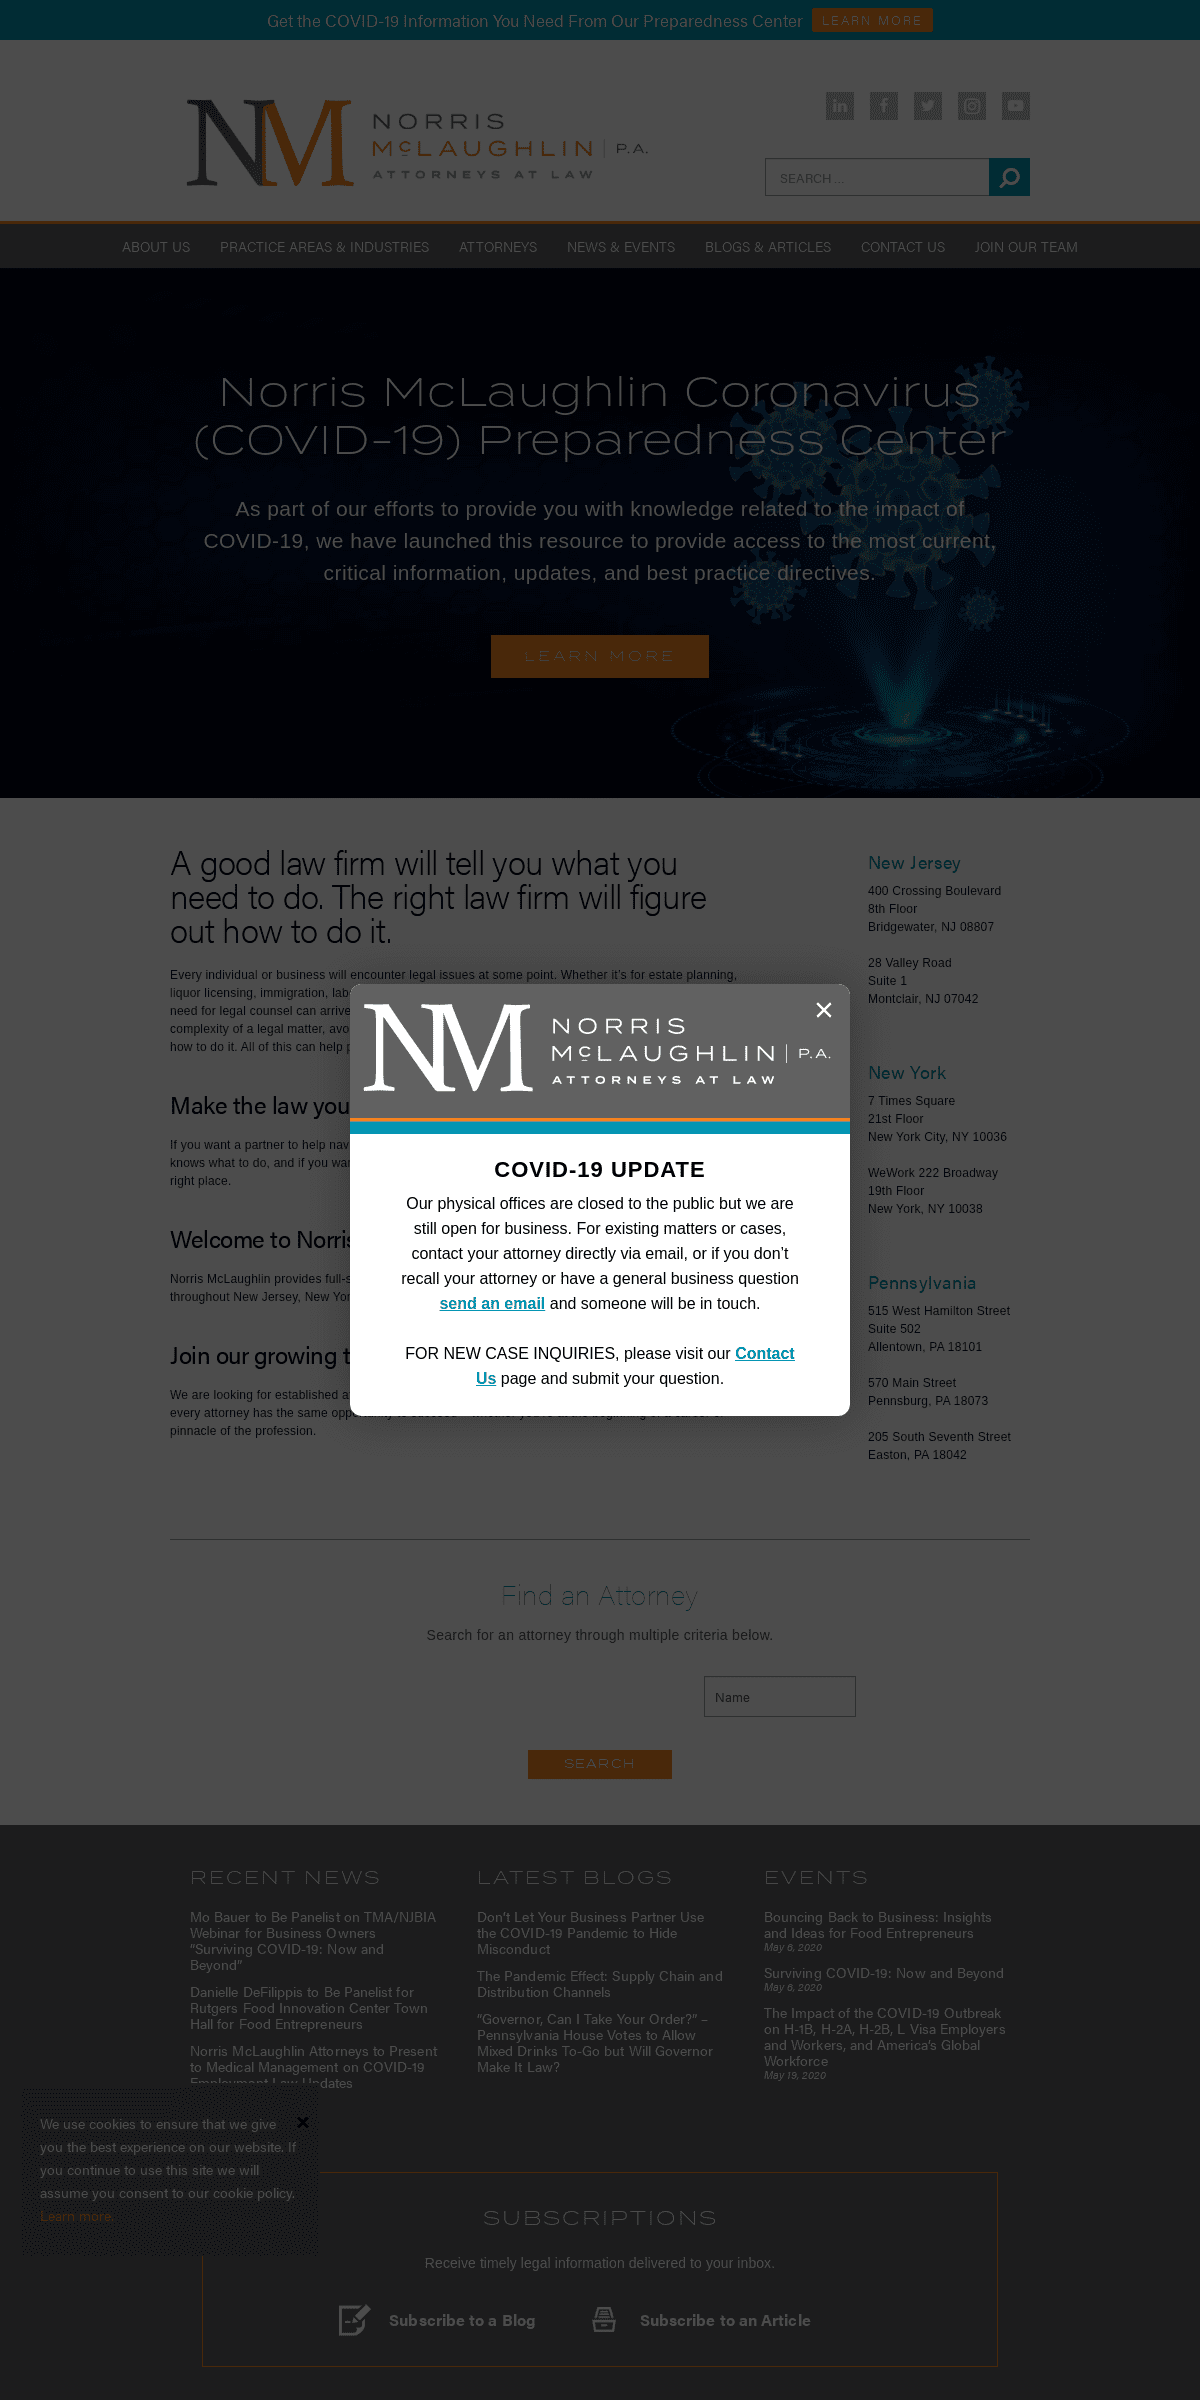 A complete backup of nmmlaw.com